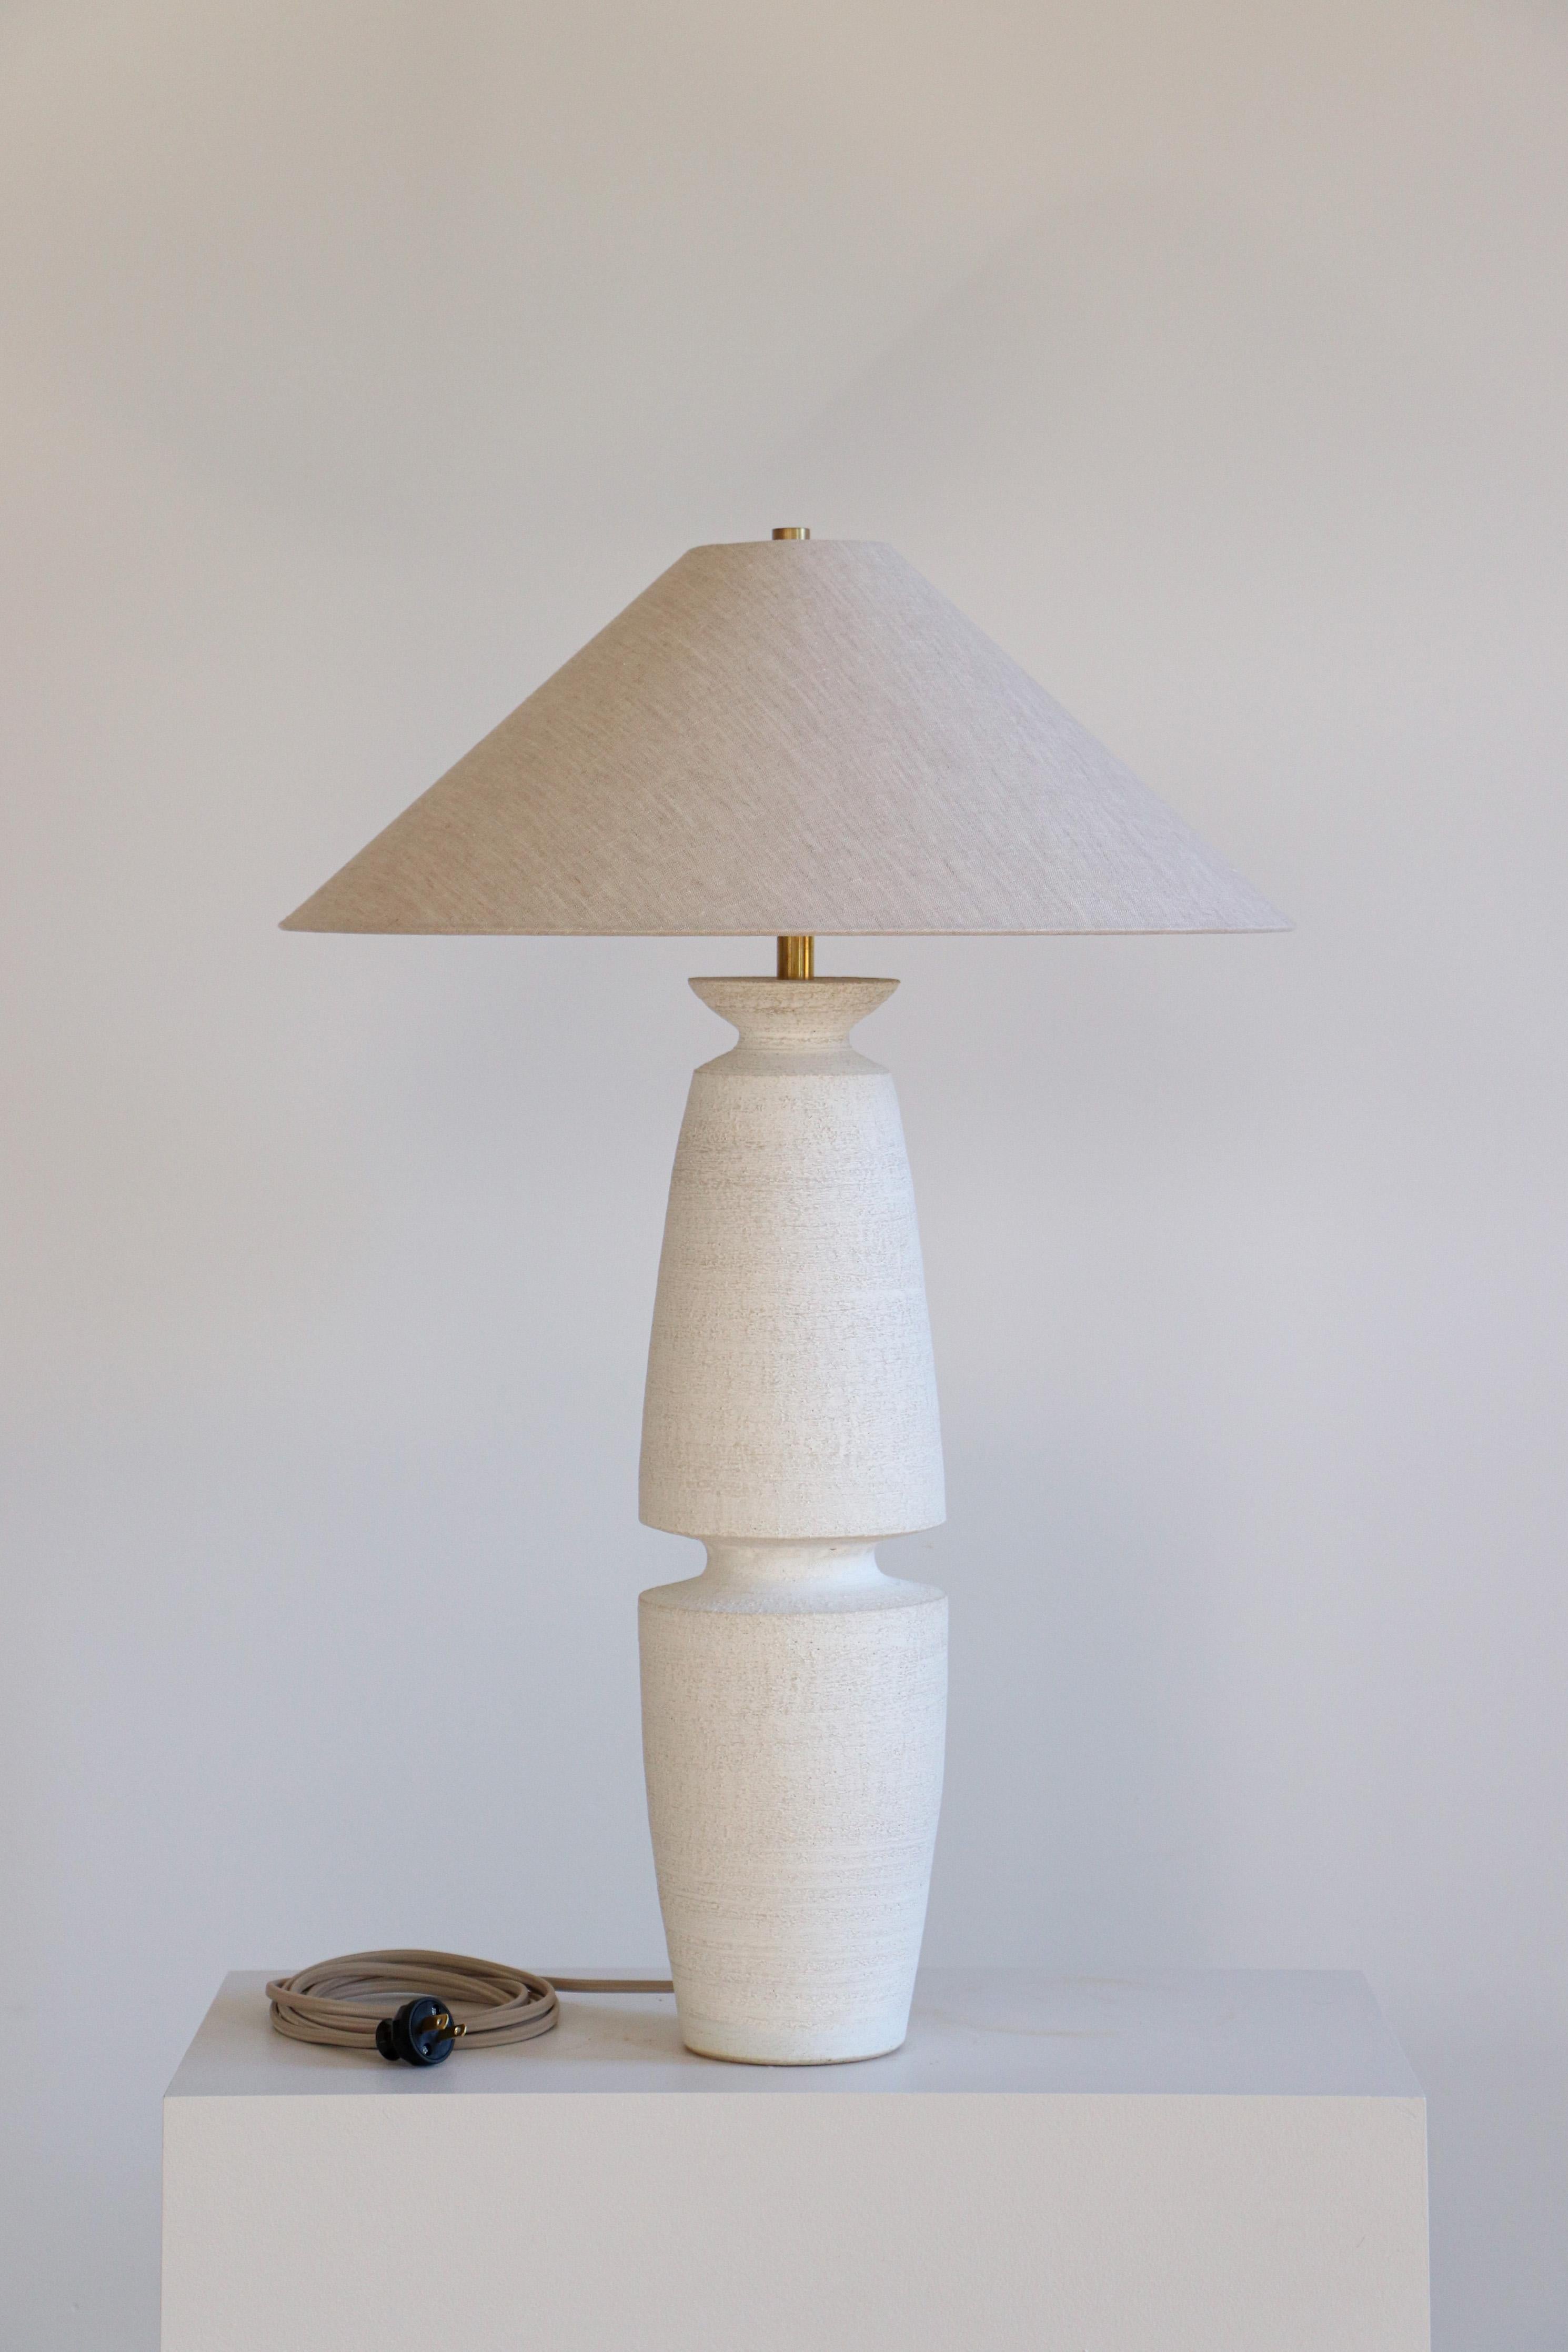 Terrasig Serena Table Lamp by Danny Kaplan Studio
Dimensions: ⌀ 51 x H 71 cm
Materials: Glazed Ceramic, Unfinished Brass, Linen

This item is handmade, and may exhibit variability within the same piece. We do our best to maintain a consistent